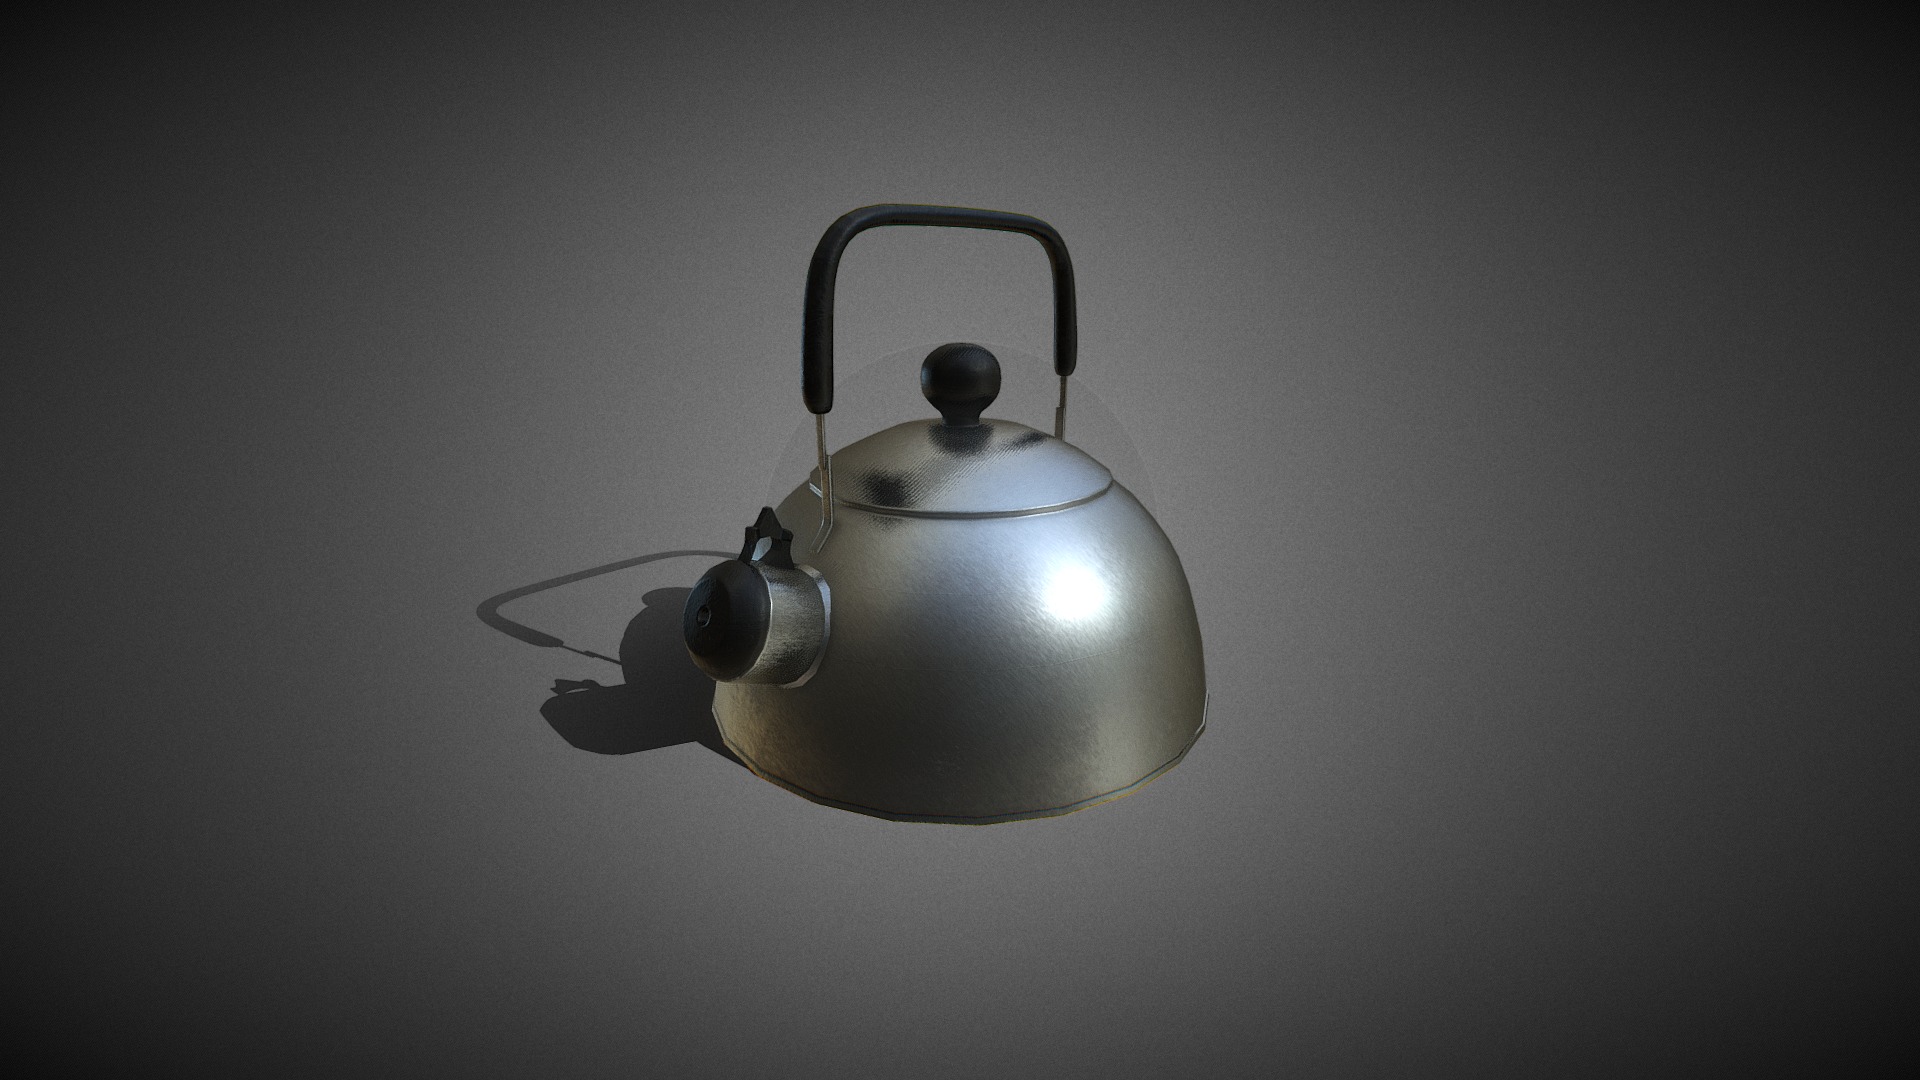 3D model Teapot - This is a 3D model of the Teapot. The 3D model is about a light bulb on a white surface.